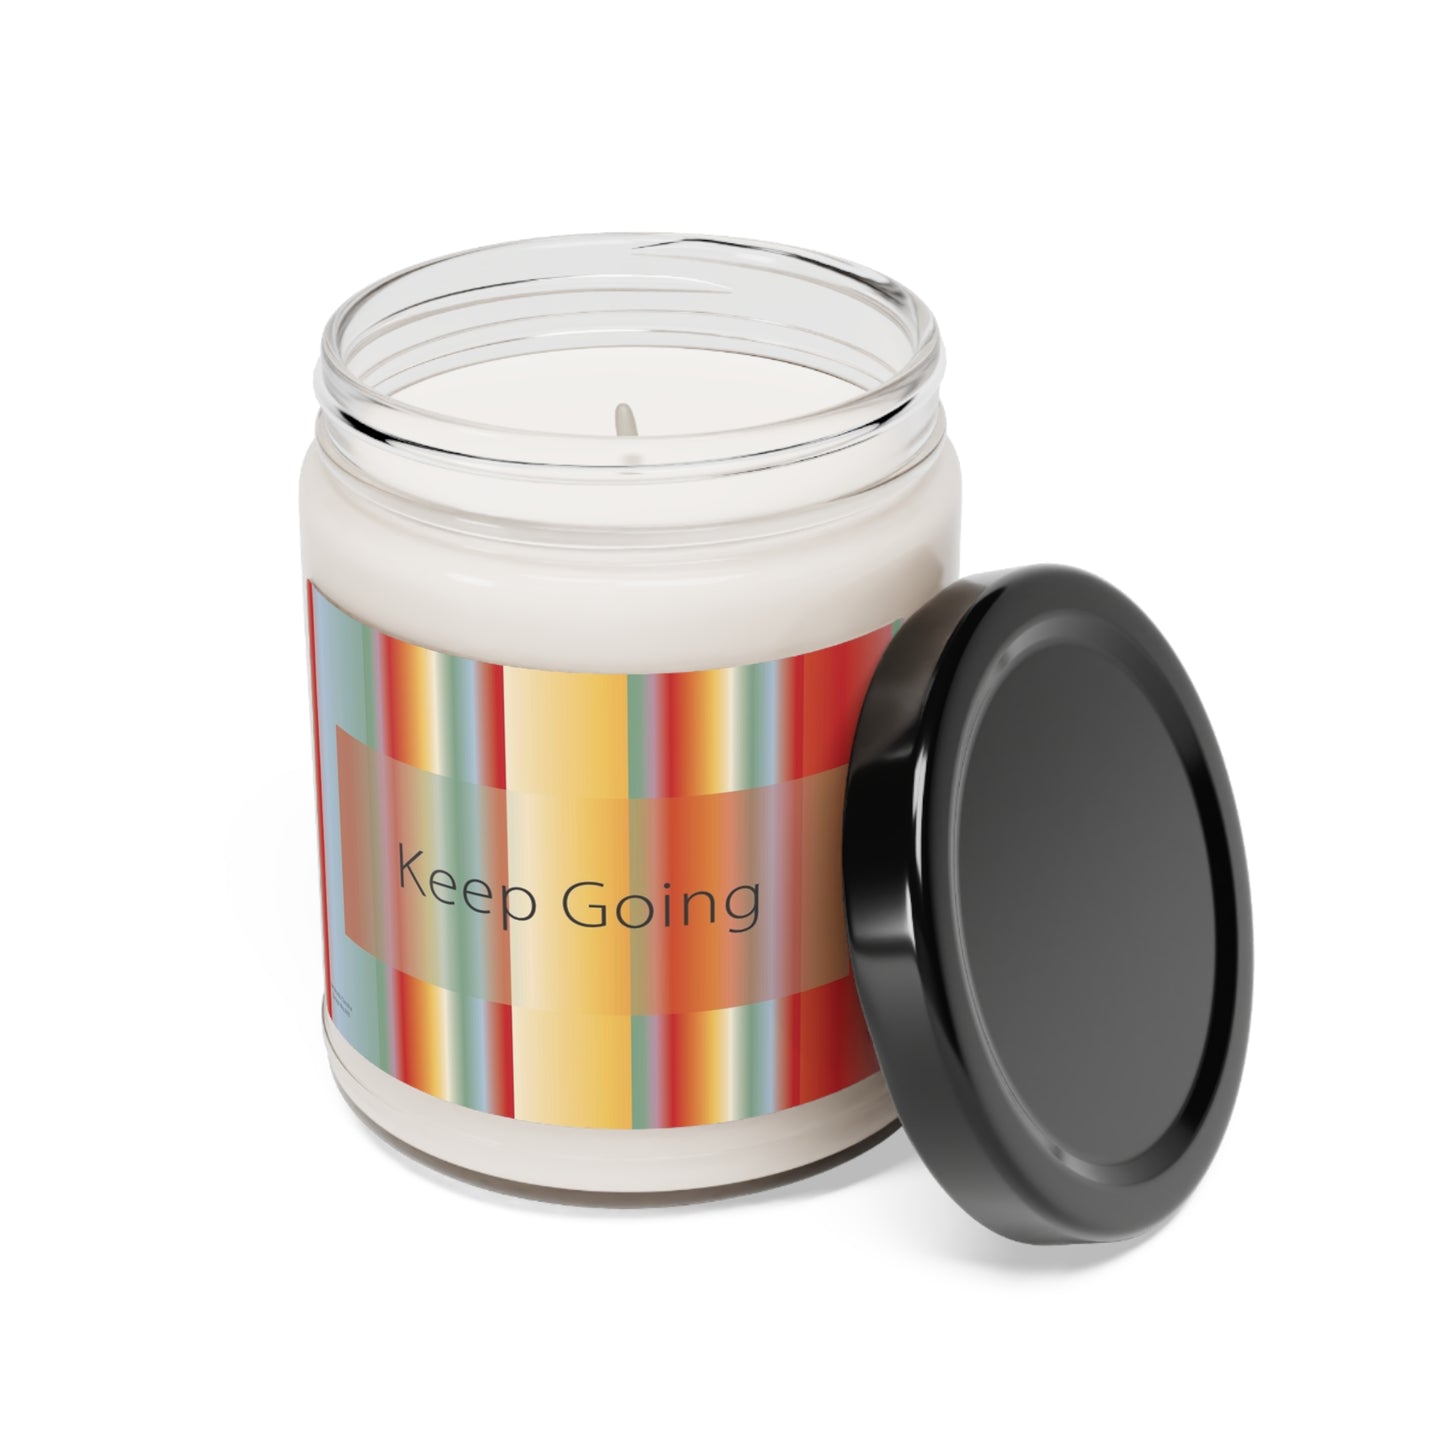 Scented Soy Candle, 9oz Keep Going - Design No.900